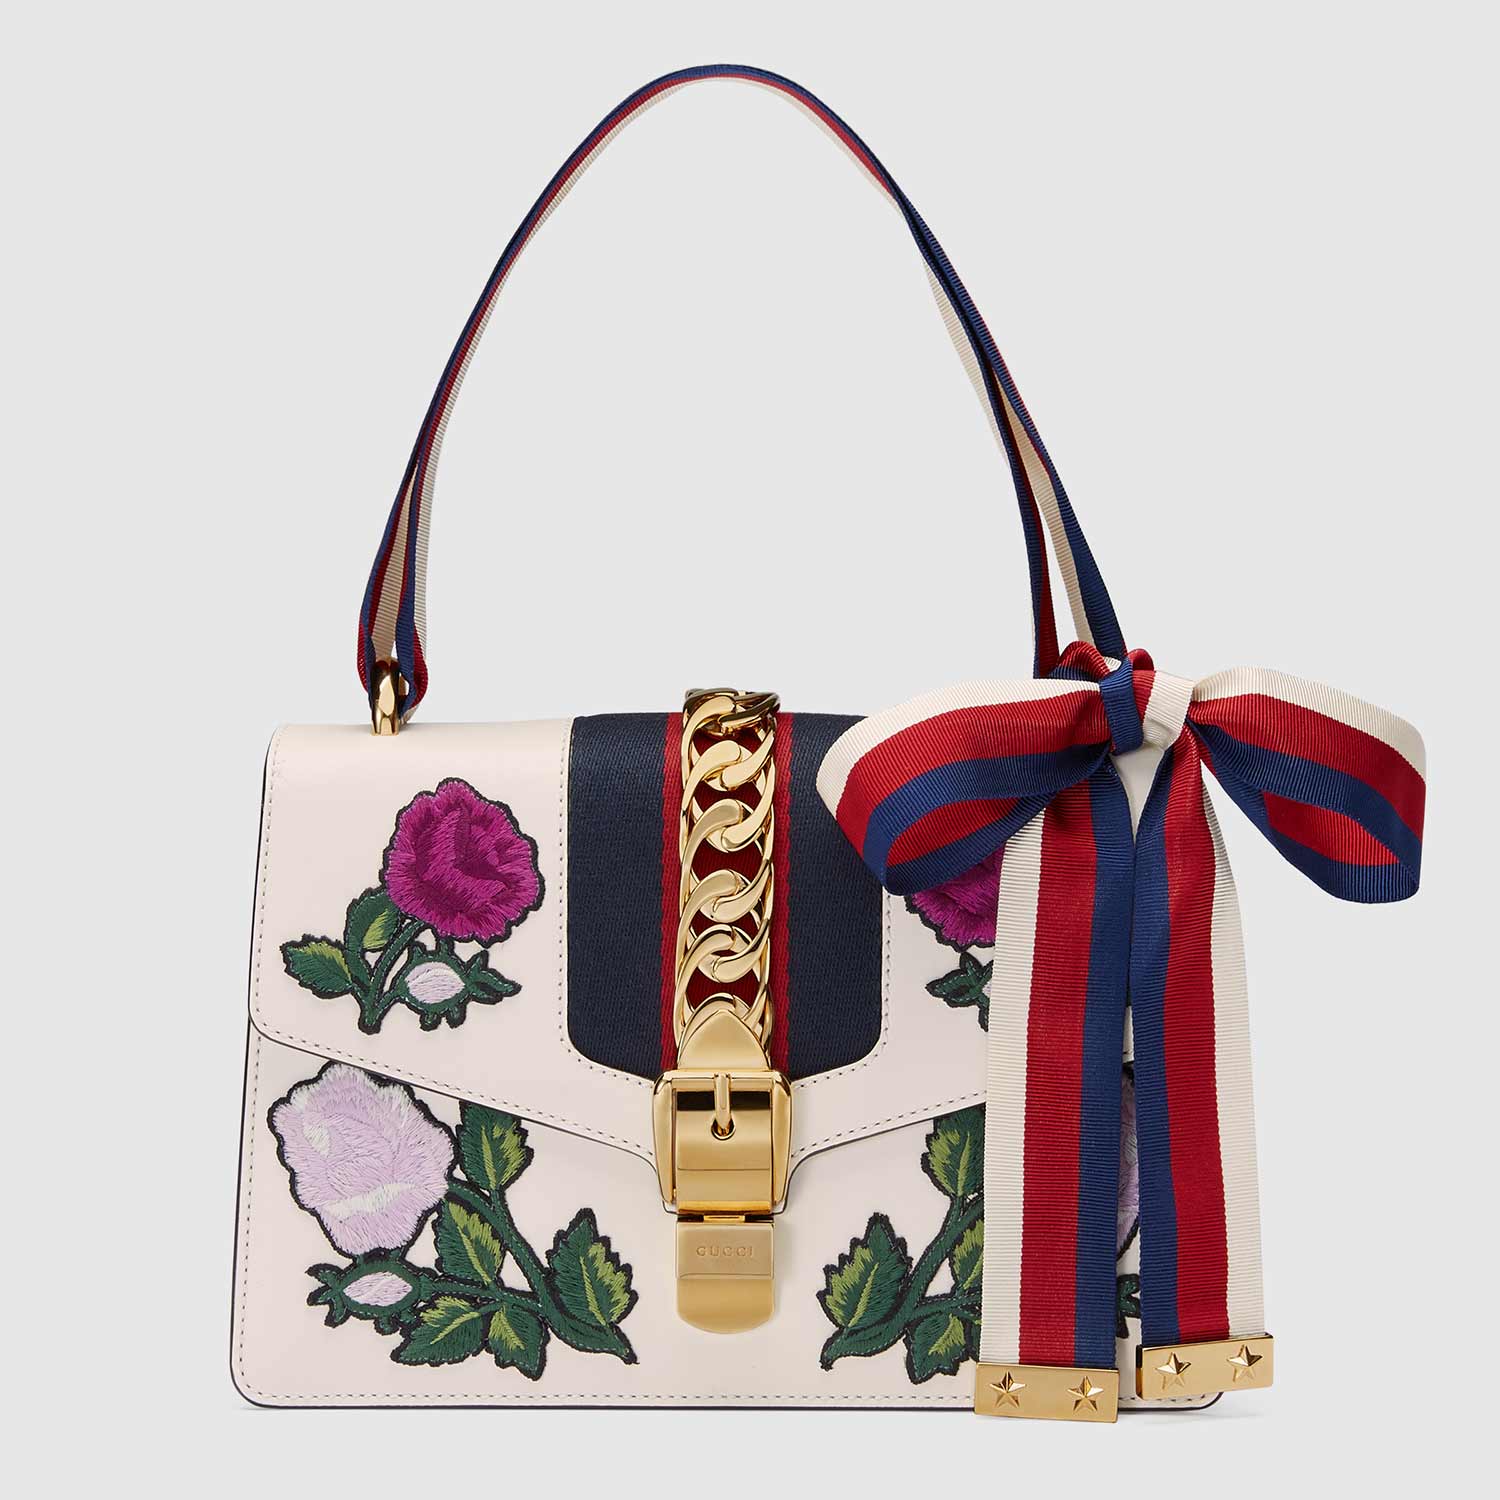 12 Must Have Gucci Bags For 2019 | Raindrops of Sapphire